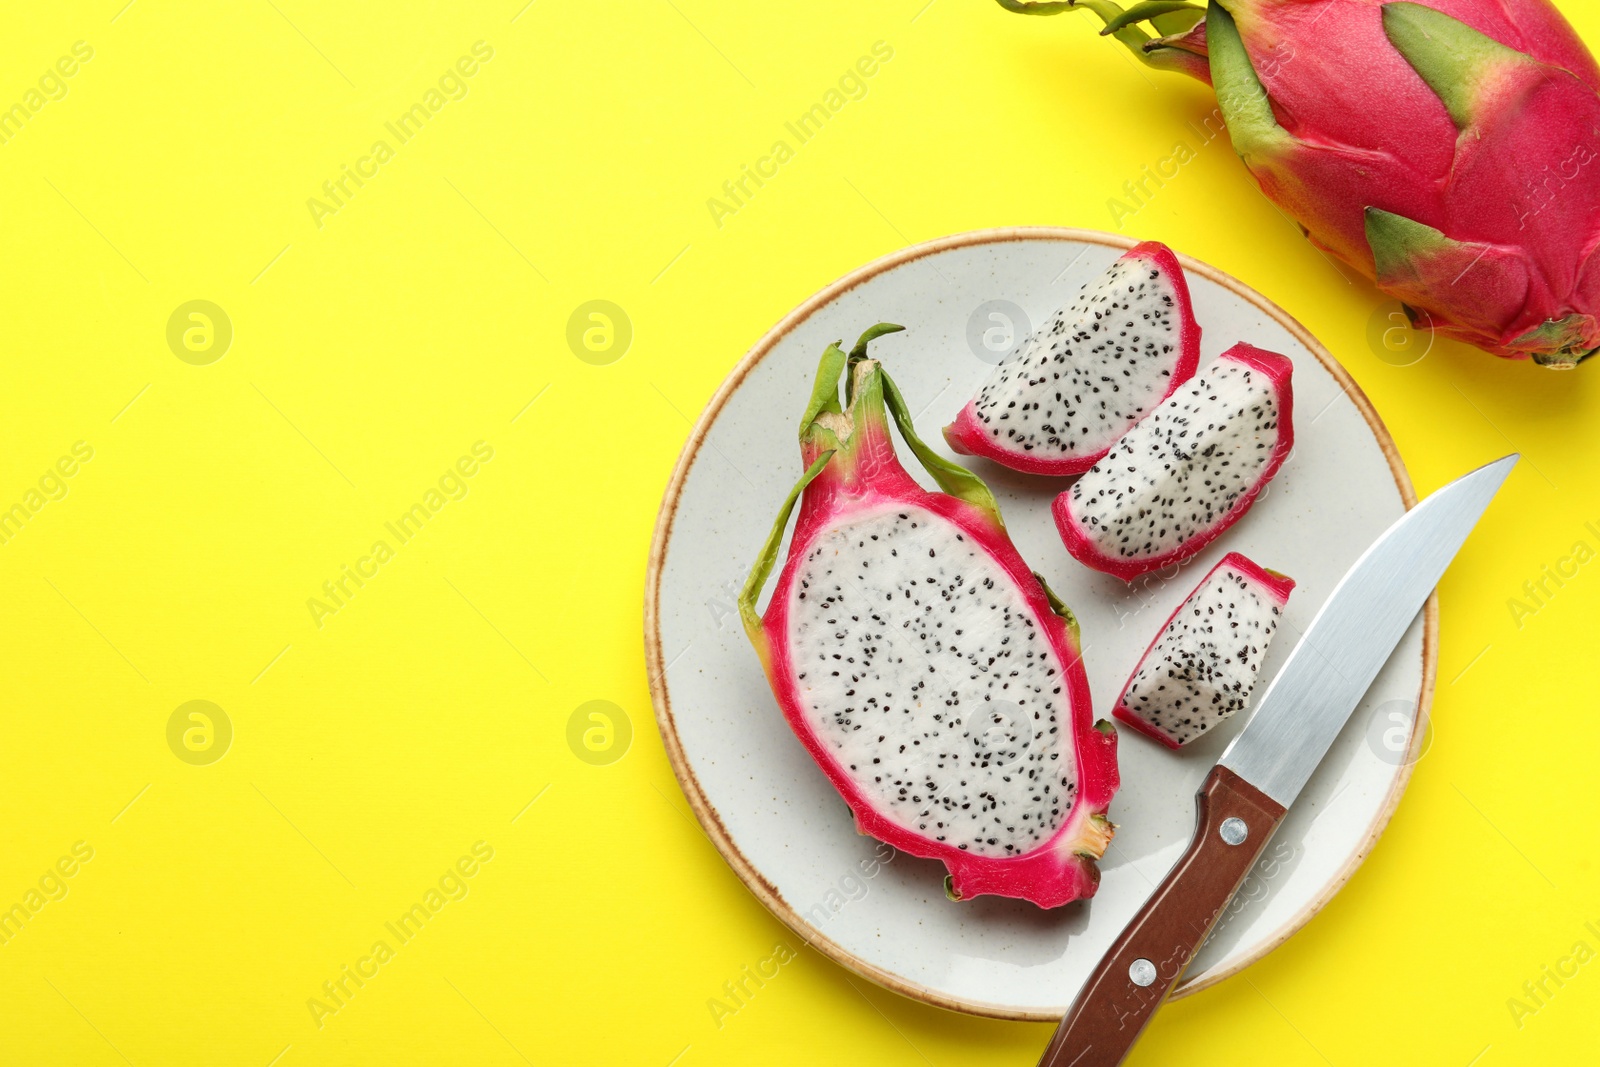 Photo of Plate with delicious cut white pitahaya fruit and knife on yellow background, flat lay. Space for text